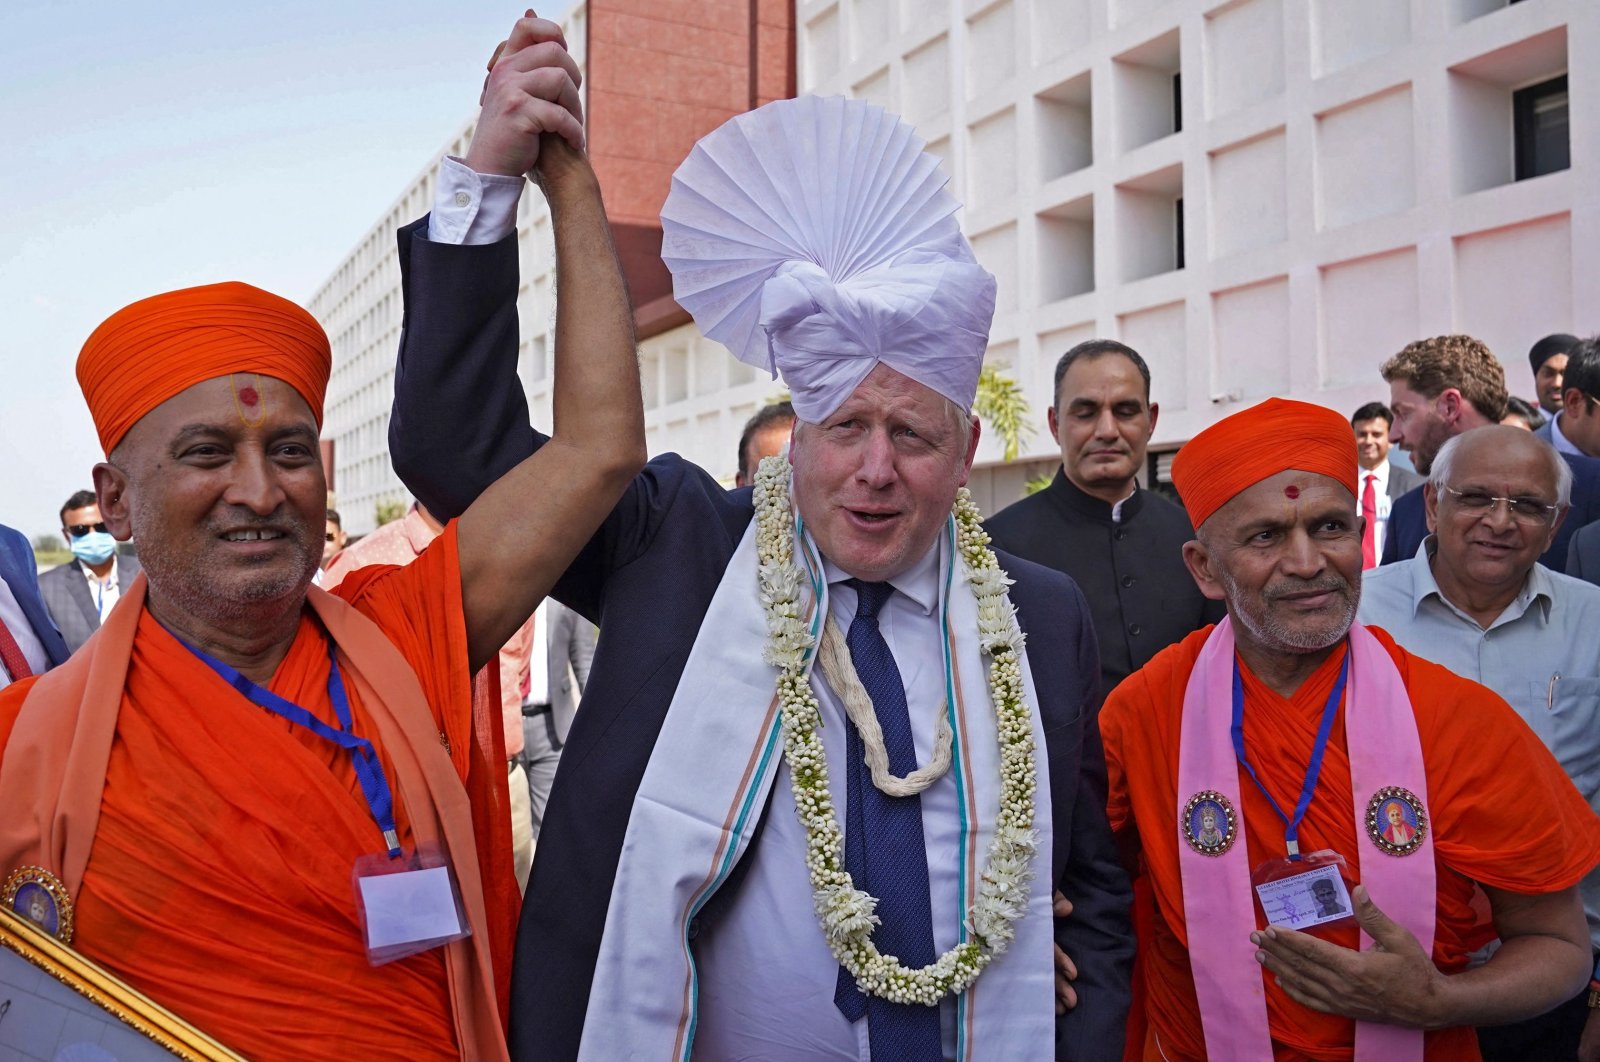 Britain&#039;s Prime Minister Boris Johnson (C) gets a traditional turban tied on his head upon his arrival at the Gujarat Biotechnology University in Gandhinagar on April 21, 2022. (AFP Photo)